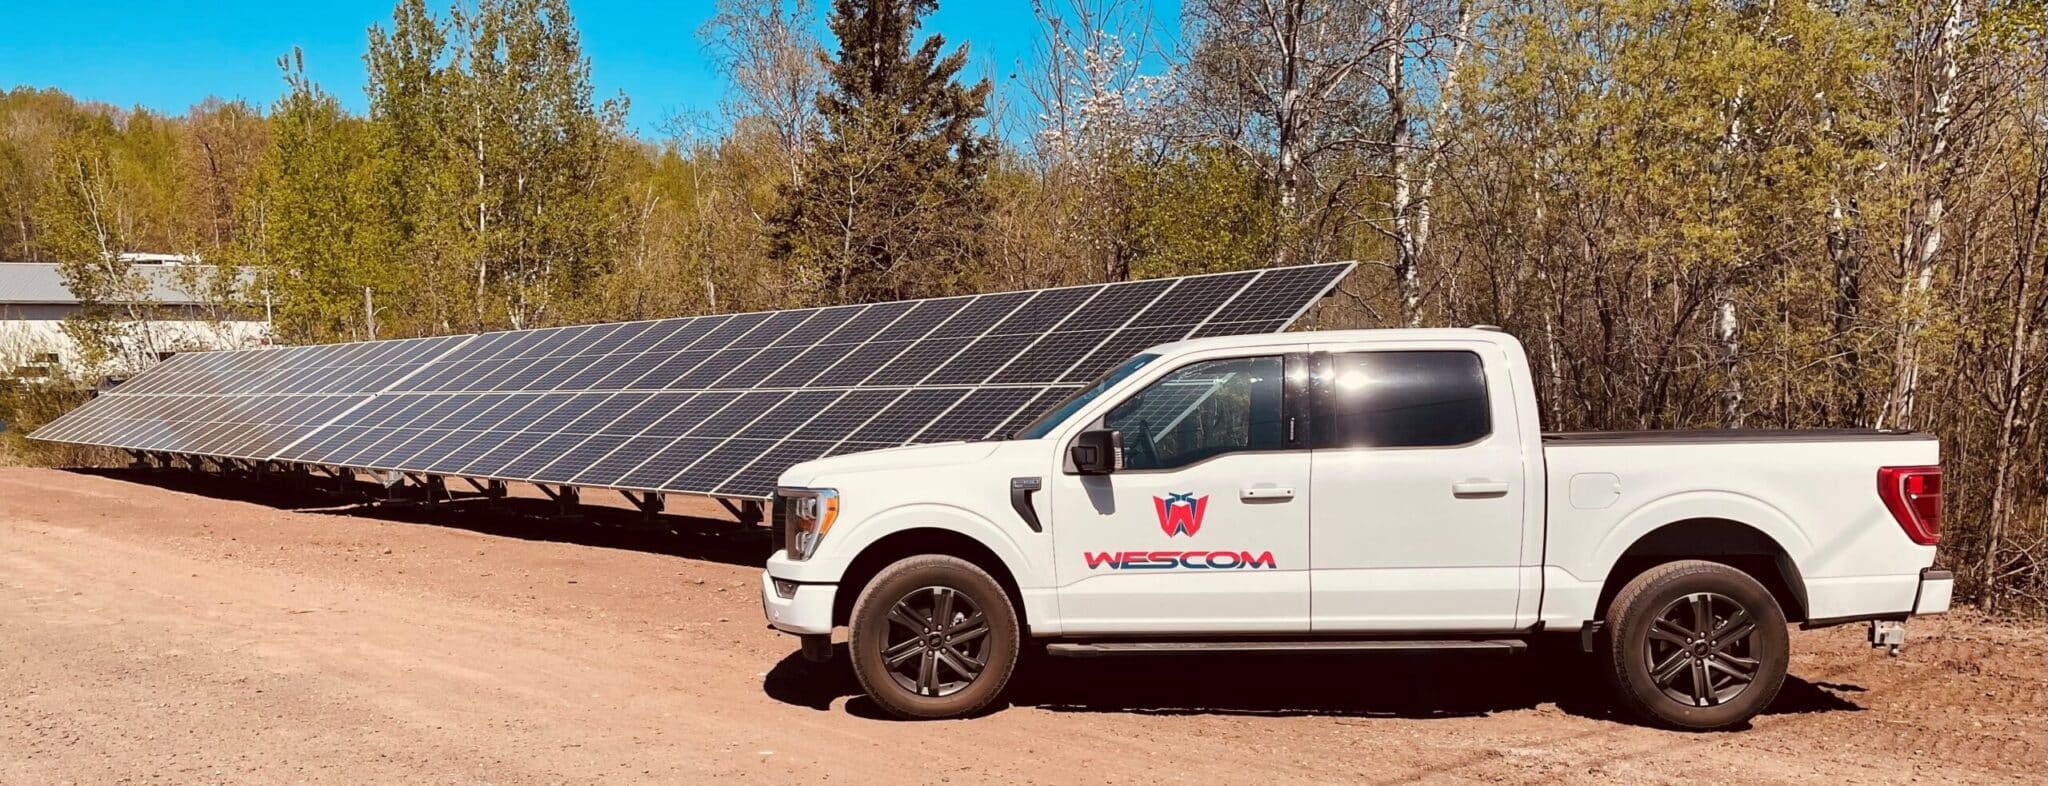 Wescom truck parked outside of a row of solar panels and trees behind